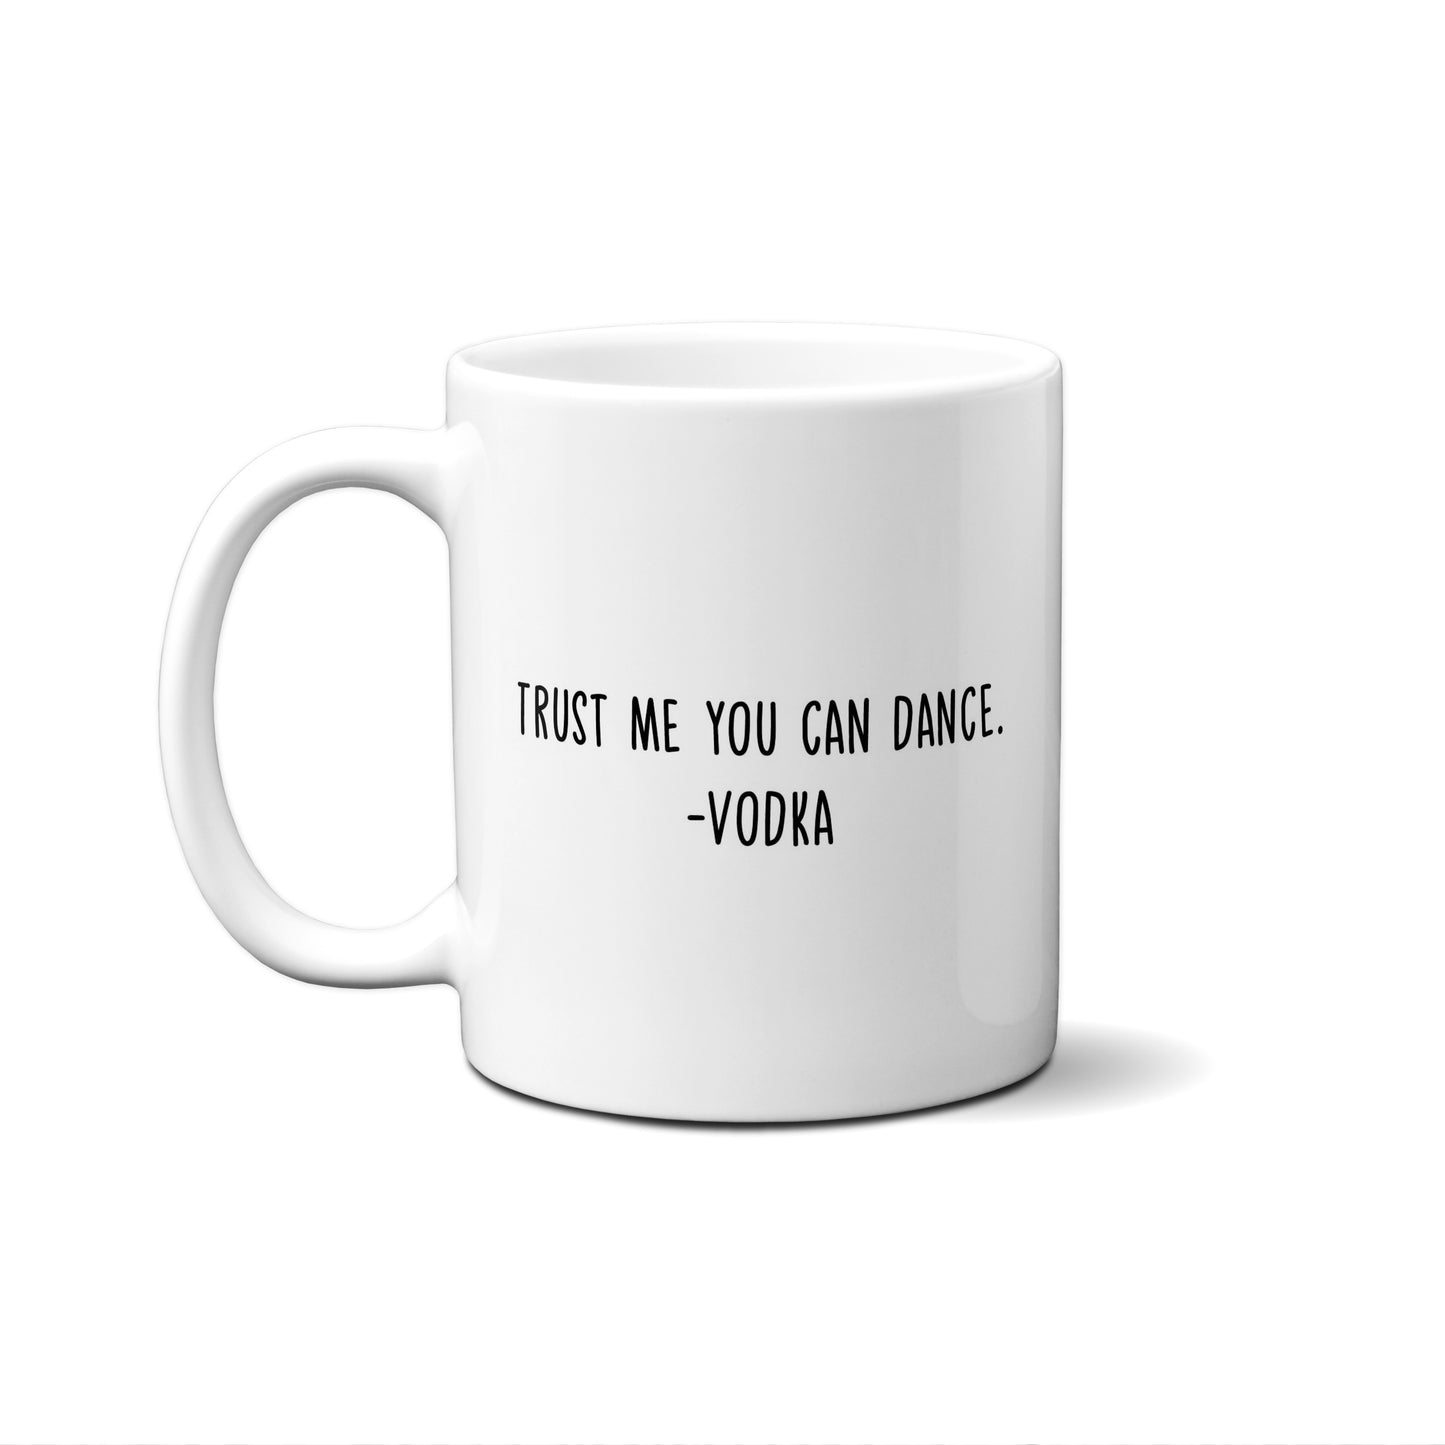 Trust Me You Can Dance. Vod... Quote Mug